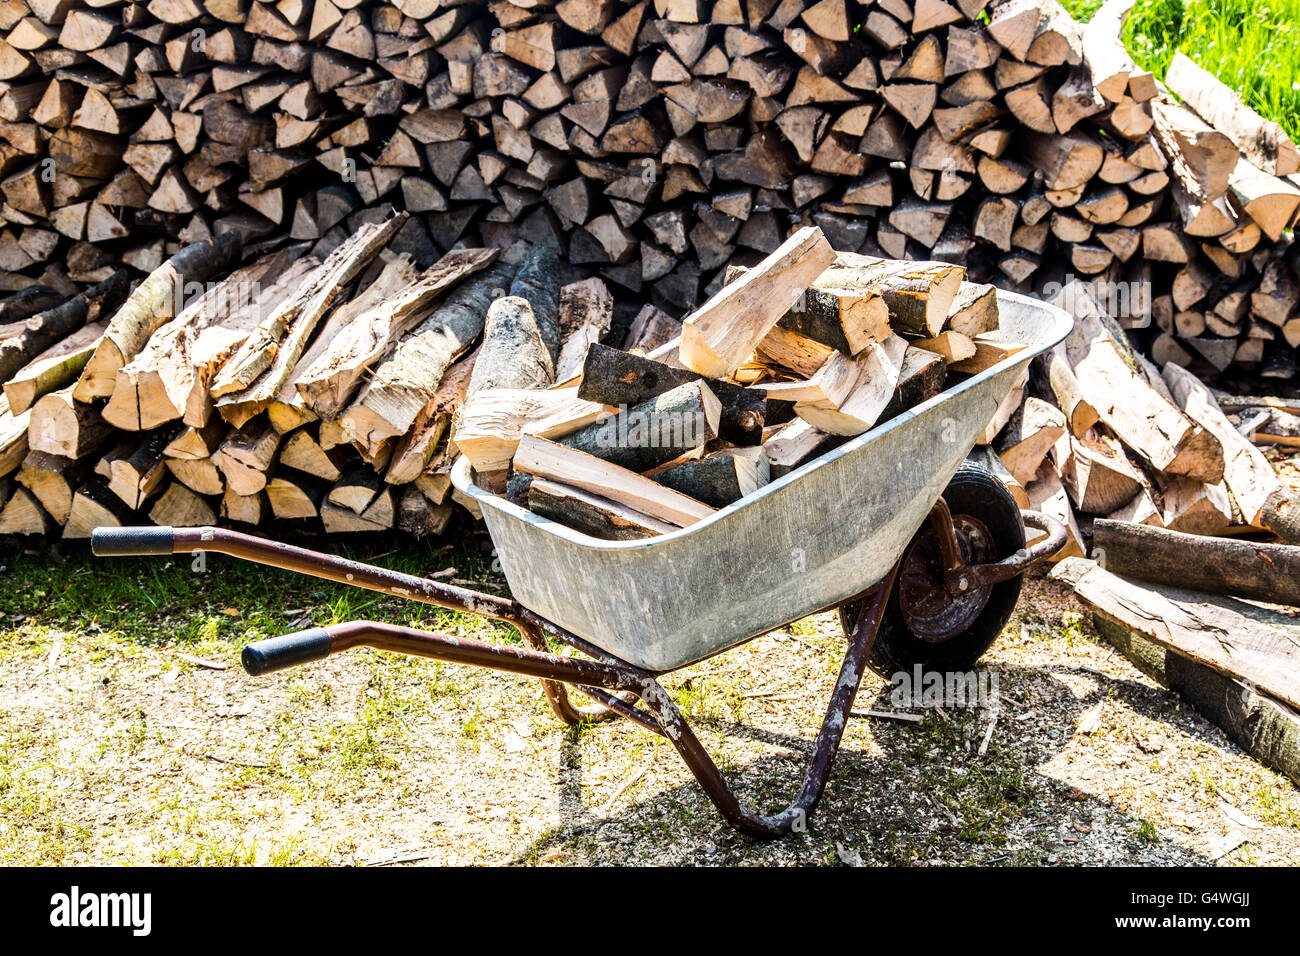 Stacked firewood, logs for burning in the stove or fireplace, Stock Photo